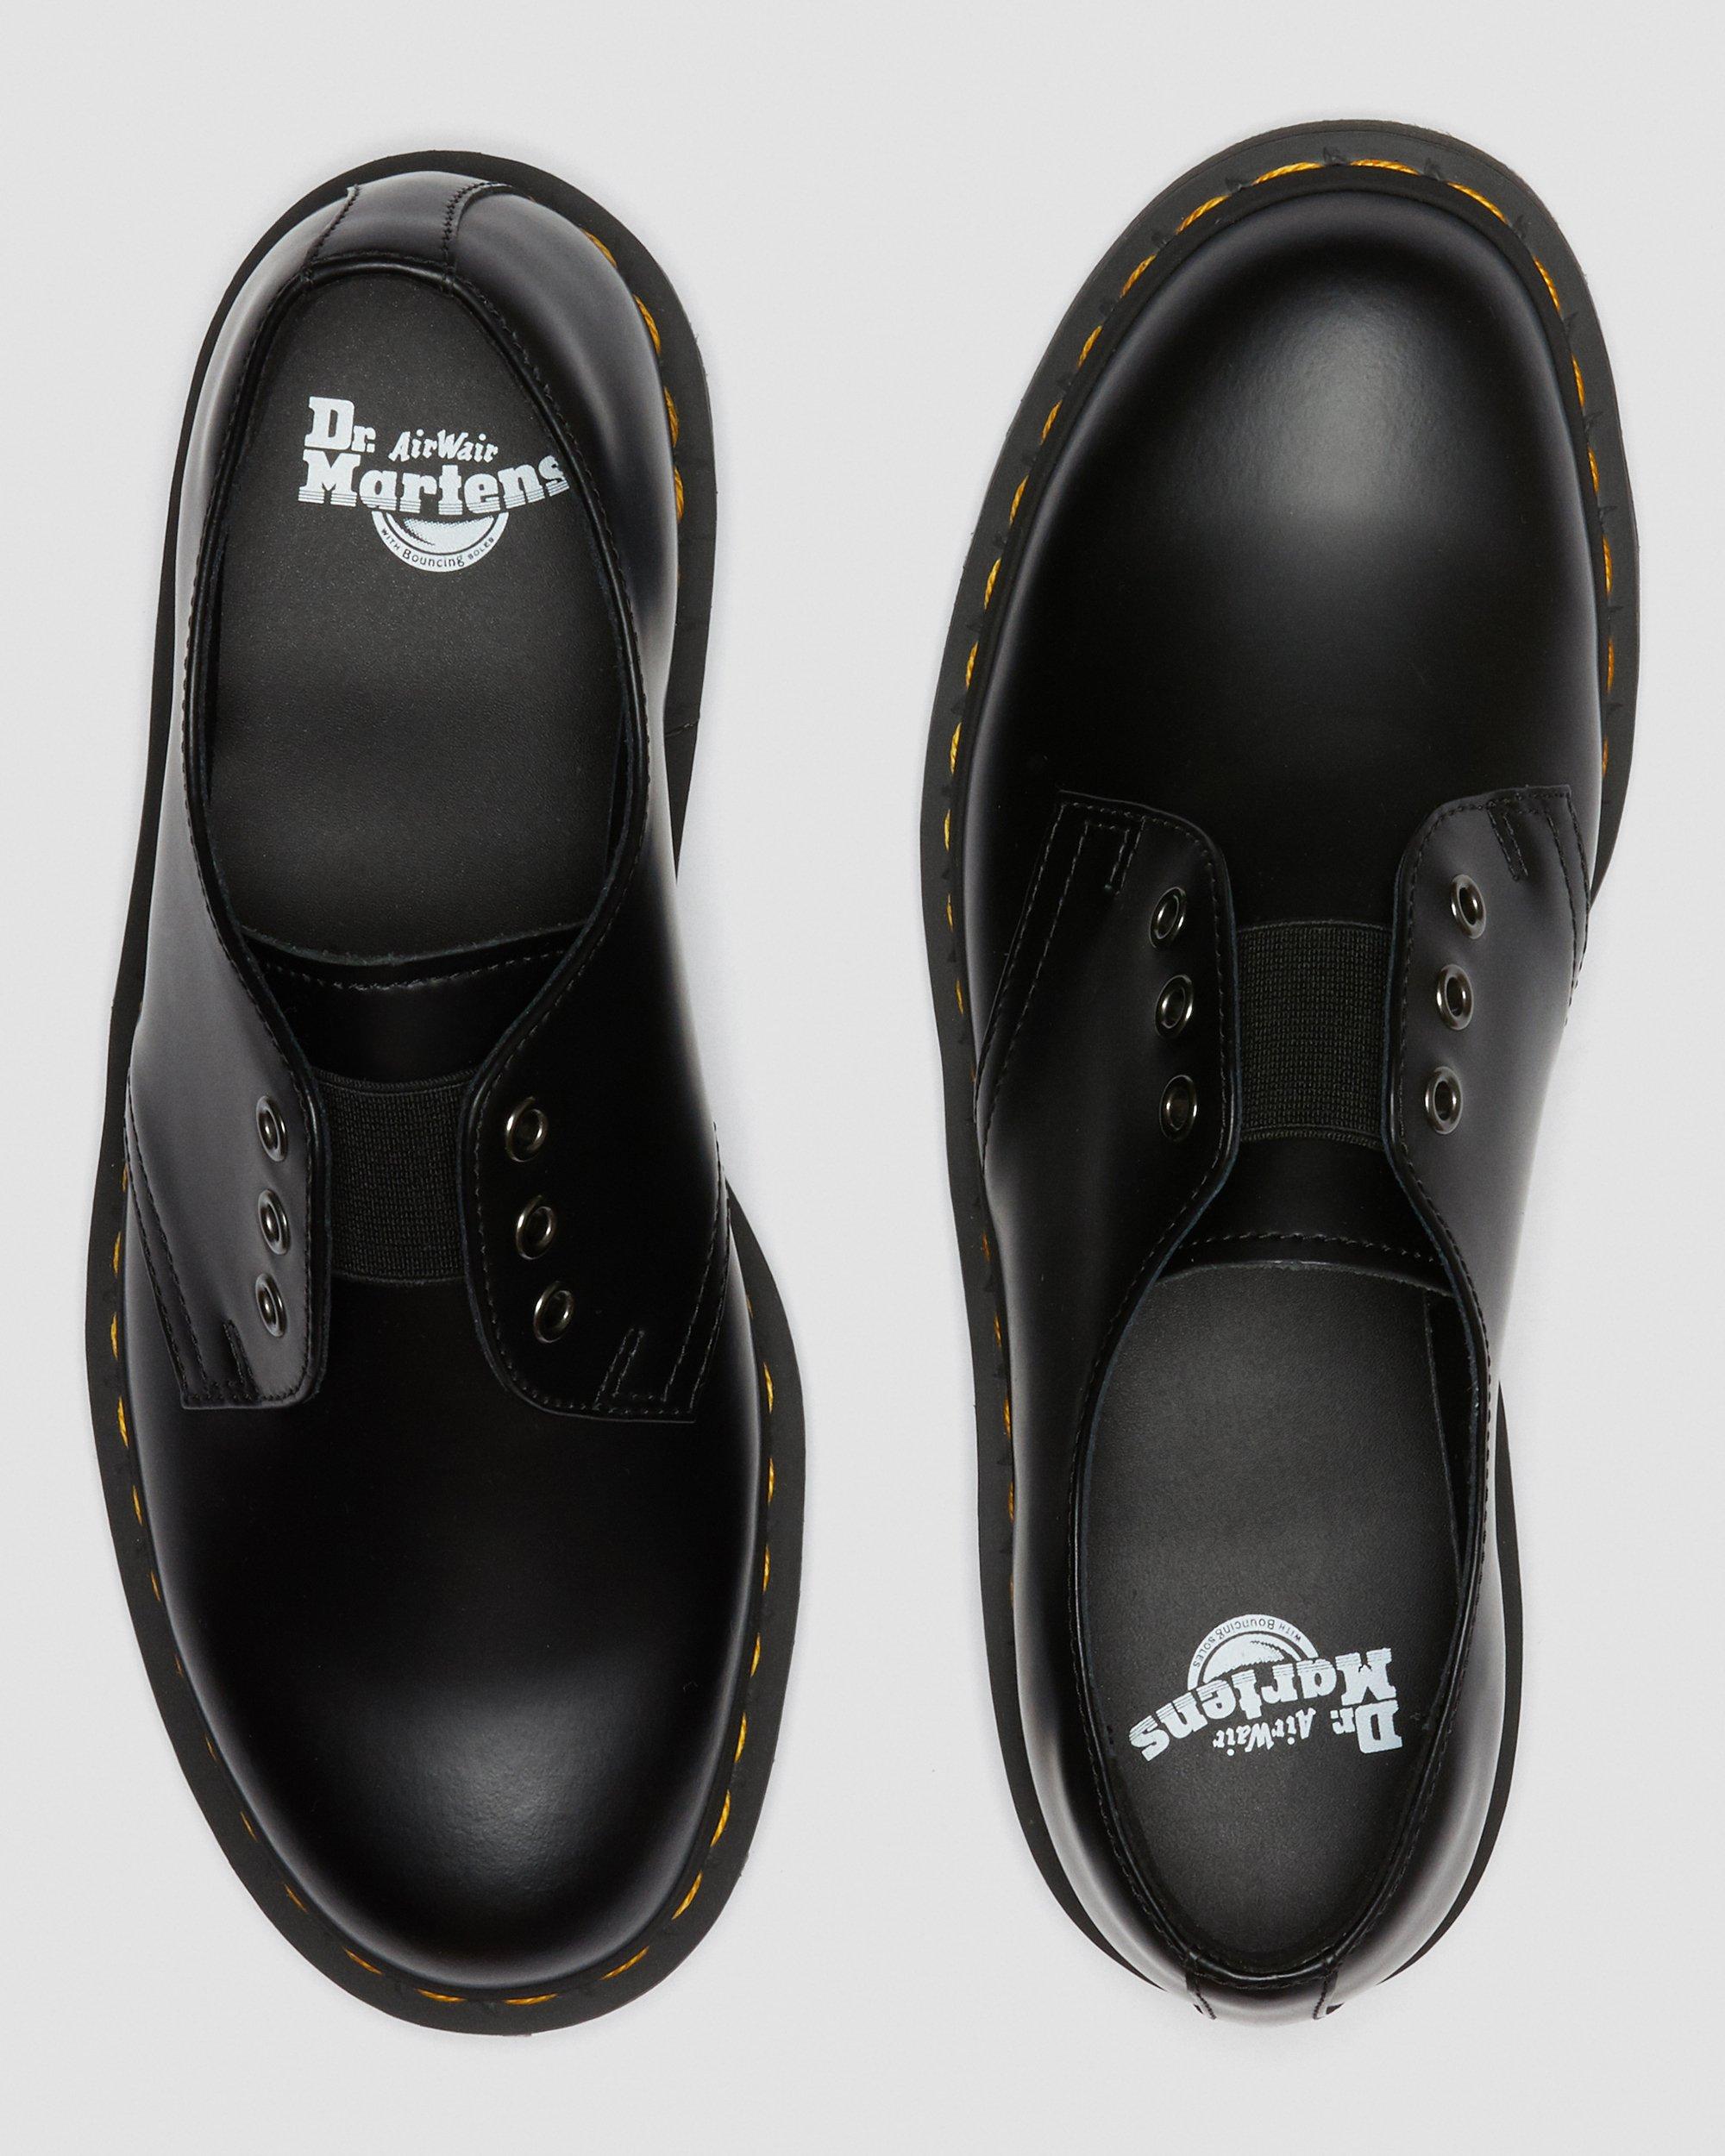 DR MARTENS 1461 Elastic Smooth Leather Oxford Shoes